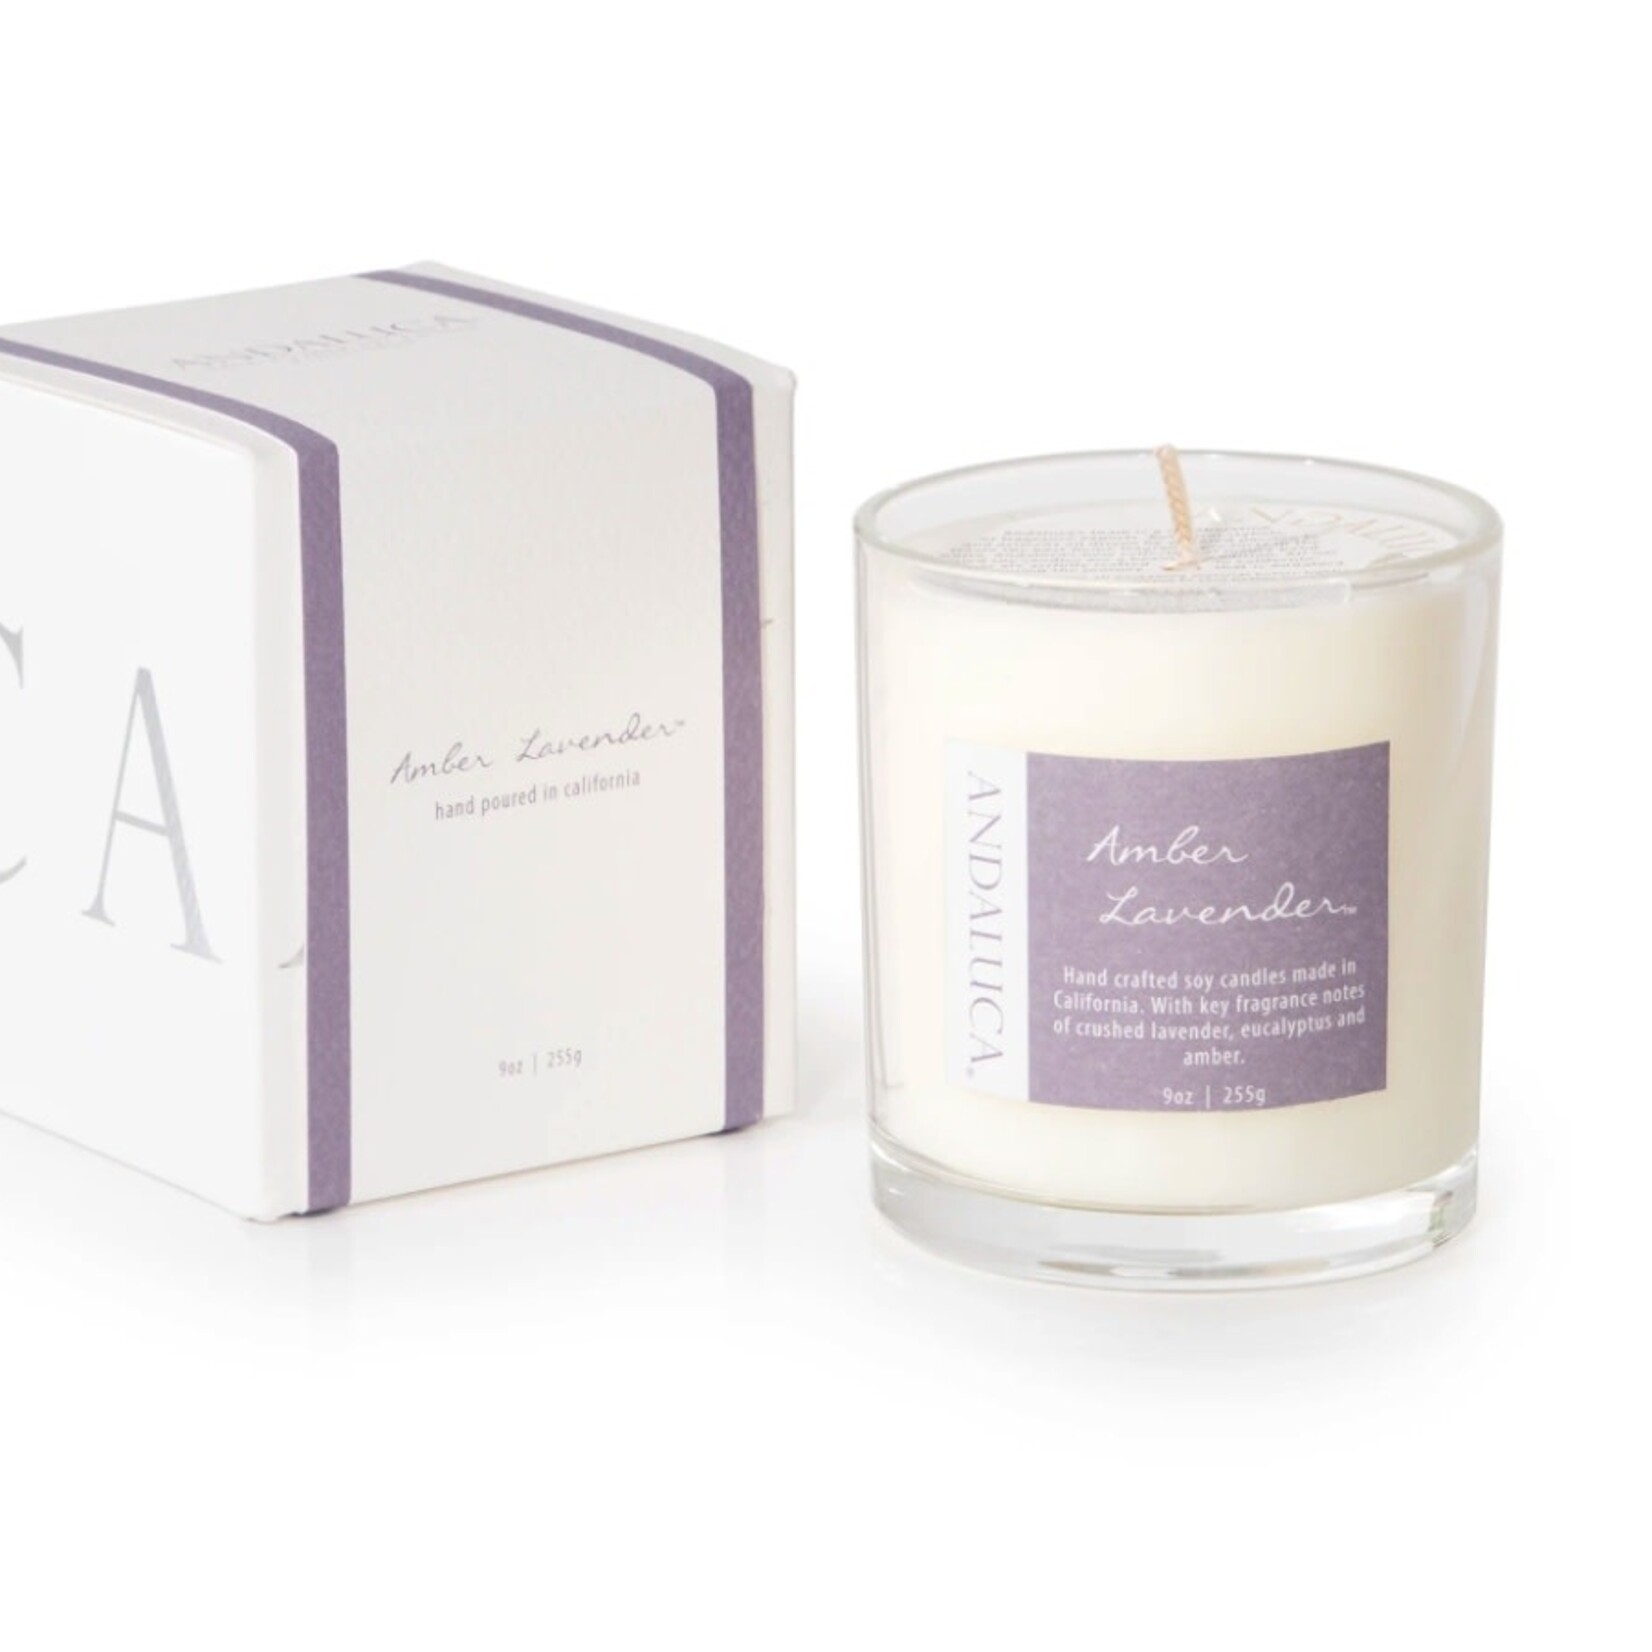 ANDALUCA ANDALUCA 9oz CANDLE AMBER LAVENDER